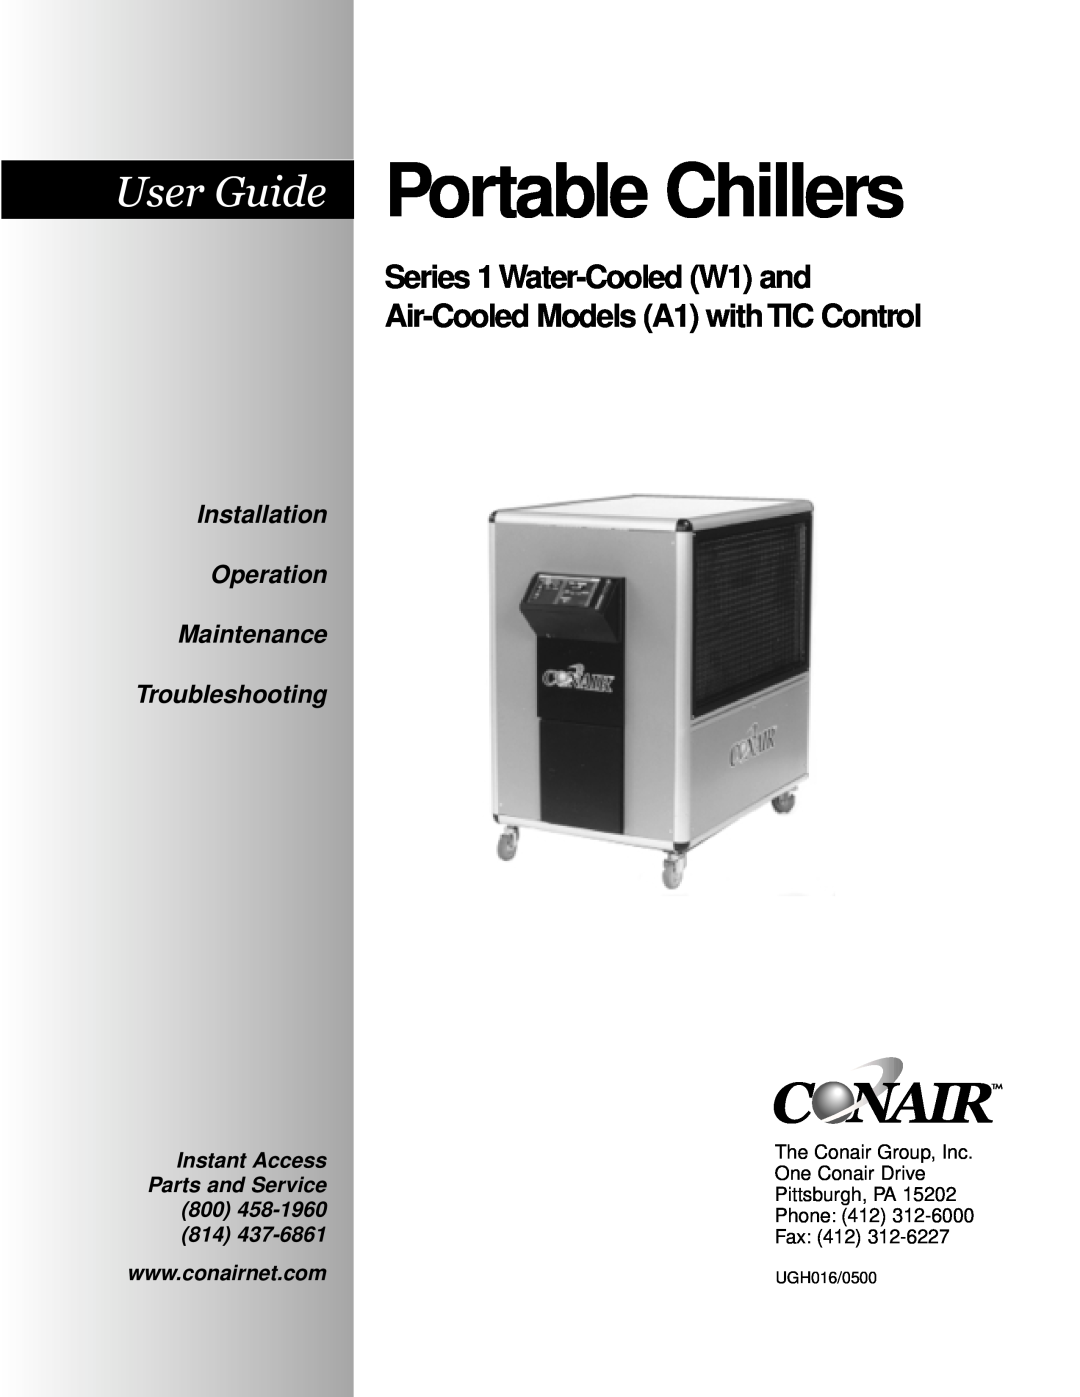 Conair Portable Chillers Series 1Water-Cooled (W1) and Air-Cooled Models (A1) withTIC Control manual Troubleshooting, Fax 